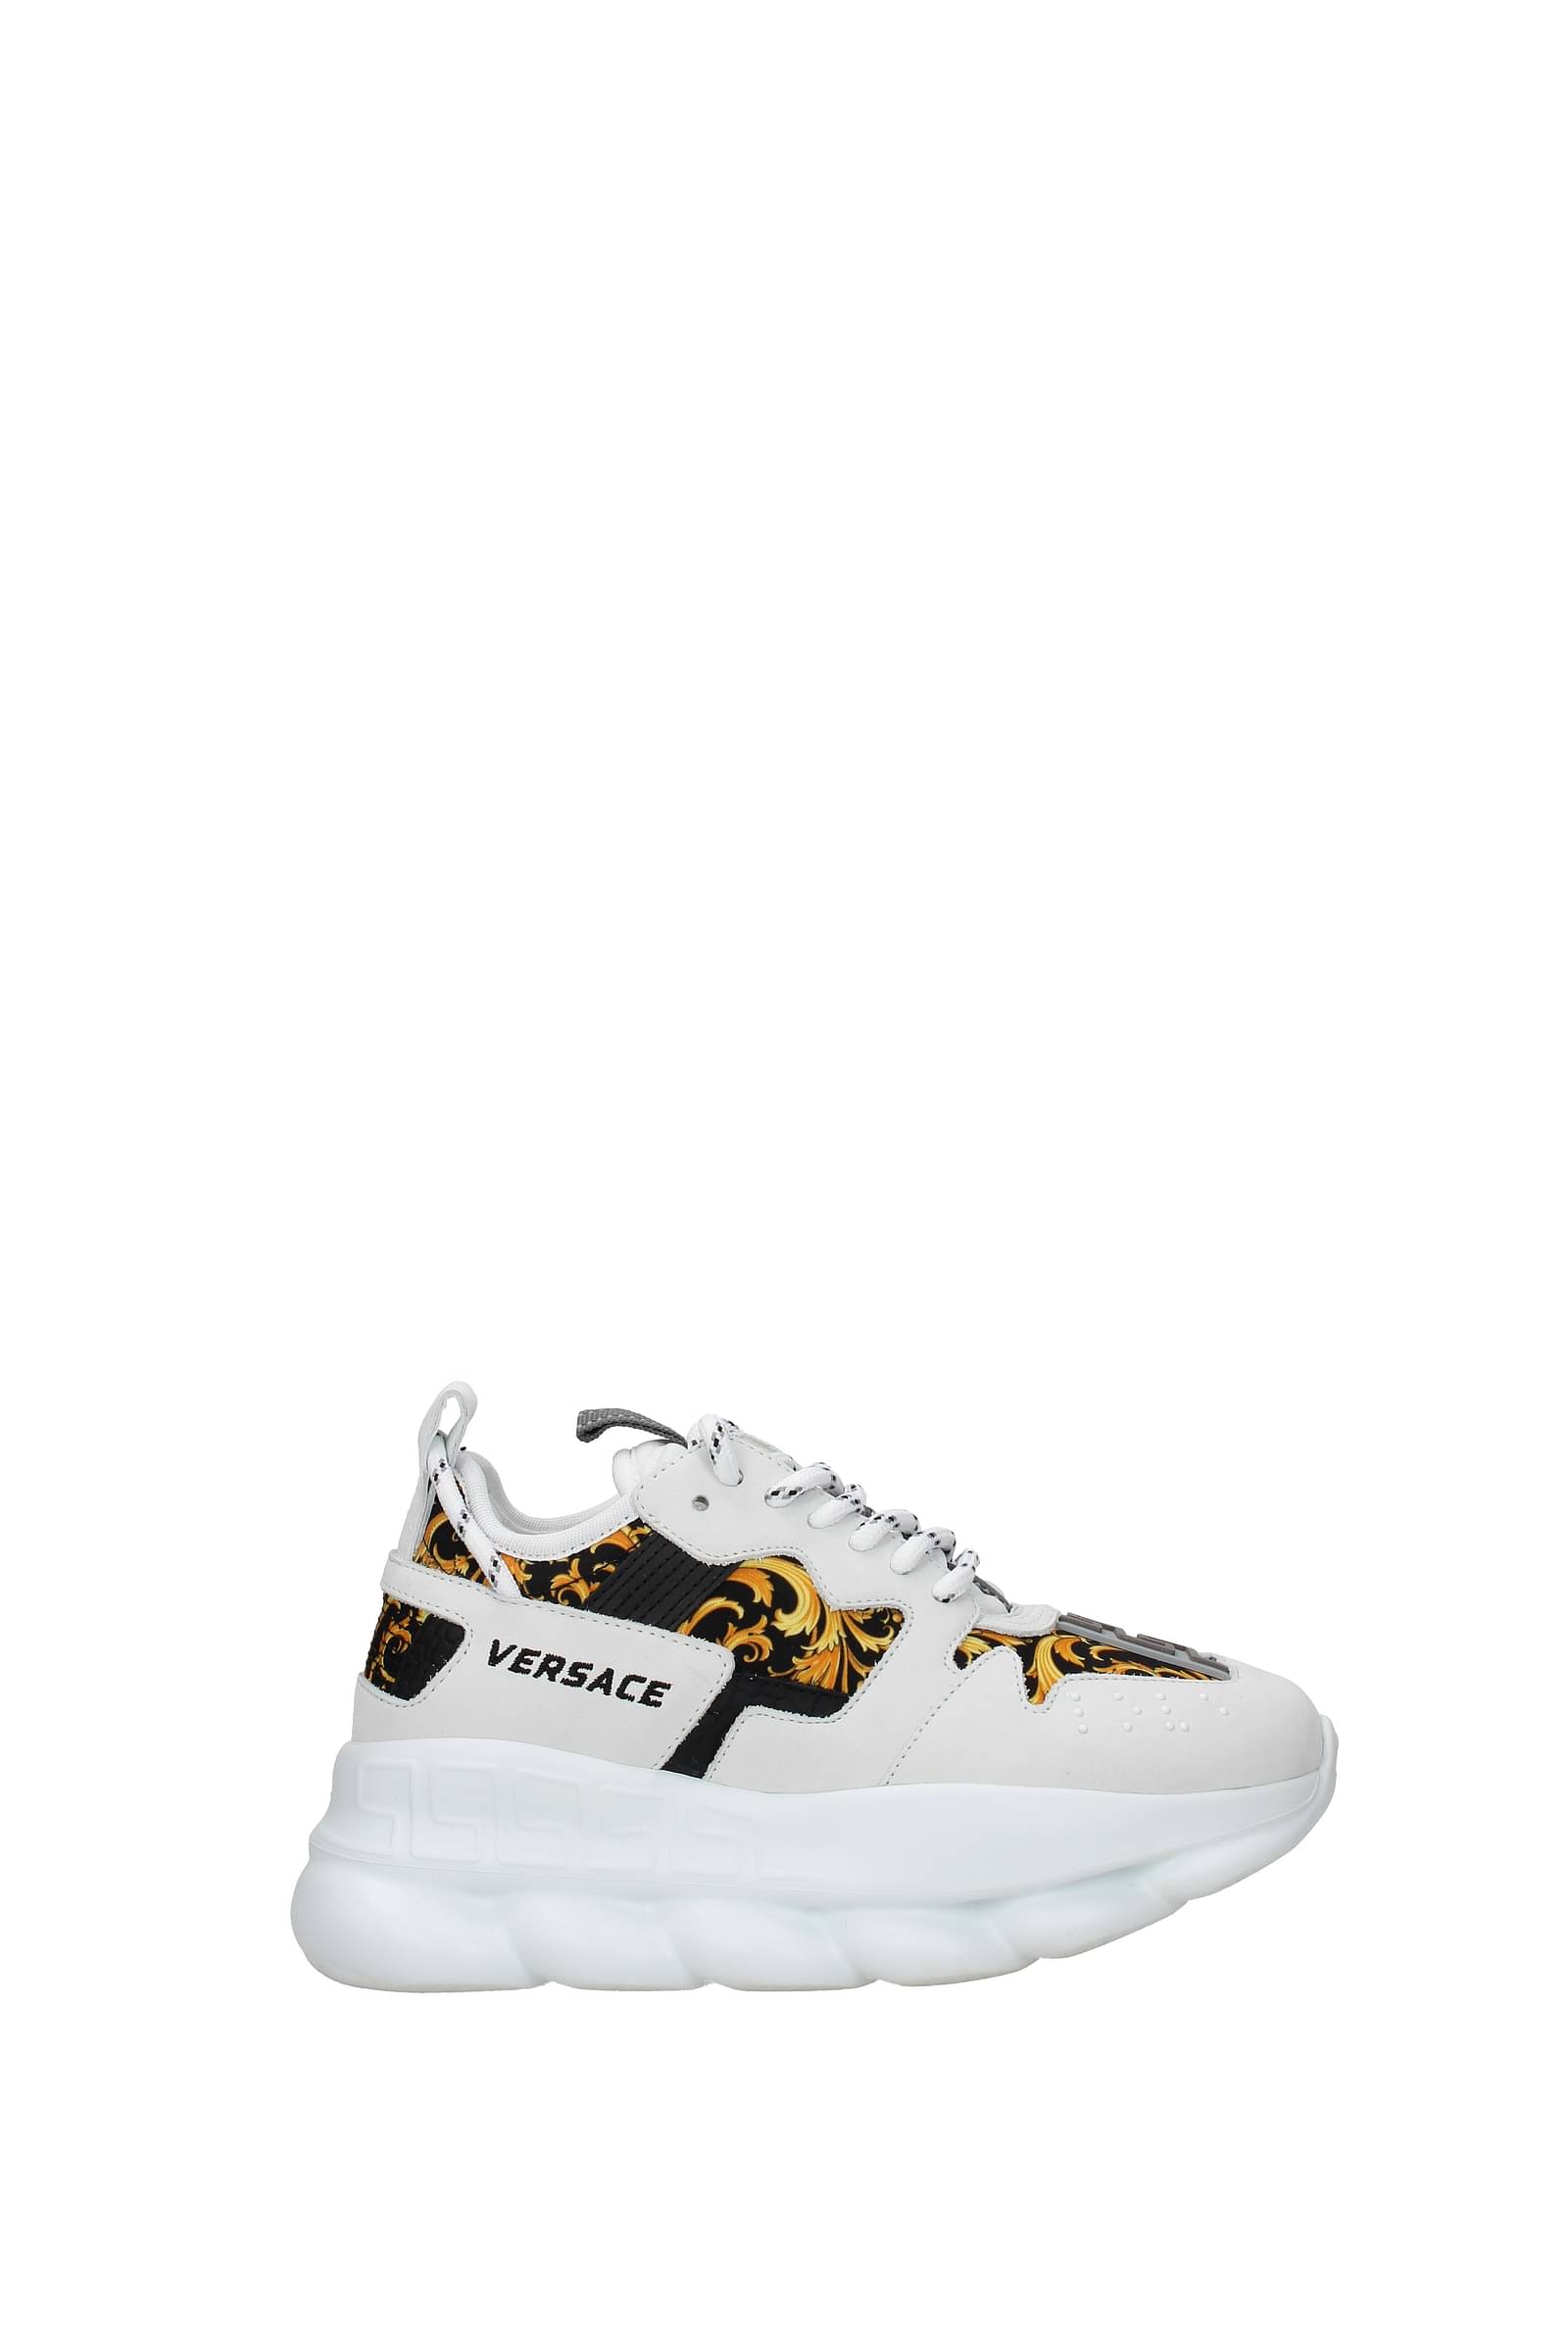 VERSACE CHAIN REACTION SNEAKERS NERO-MULTICOLOR – Enzo Clothing Store